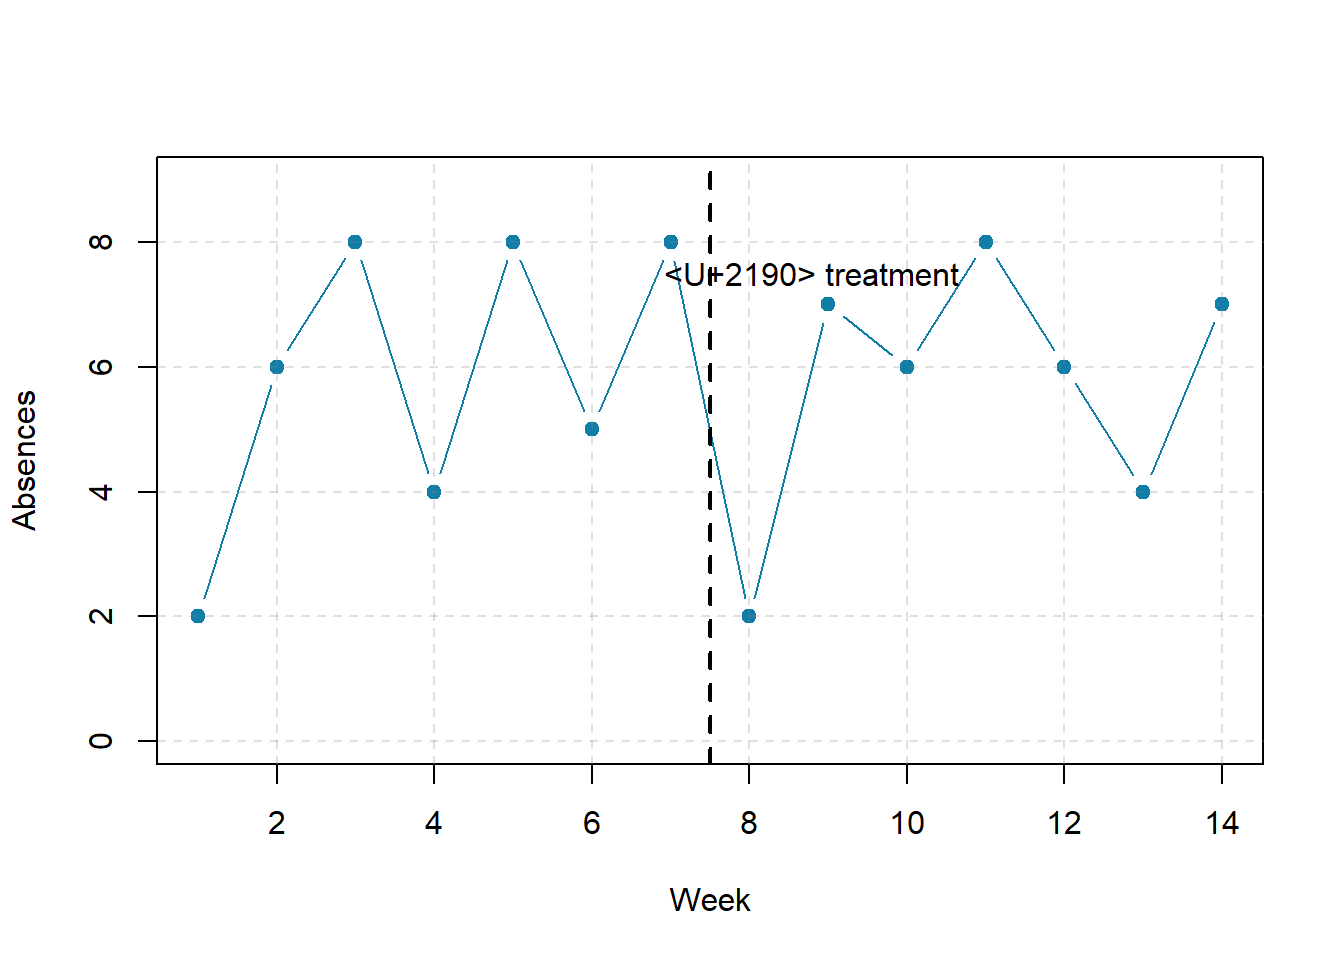 Two line graphs. The x-axes on both are labeled Week and range from 0 to 14. The y-axes on both are labeled Absences and range from 0 to 8. Between weeks 7 and 8 a vertical dotted line indicates when a treatment was introduced. Both graphs show generally high levels of absences from weeks 1 through 7 (before the treatment) and only 2 absences in week 8 (the first observation after the treatment). The top graph shows the absence level staying low from weeks 9 to 14. The bottom graph shows the absence level for weeks 9 to 15 bouncing around at the same high levels as before the treatment.